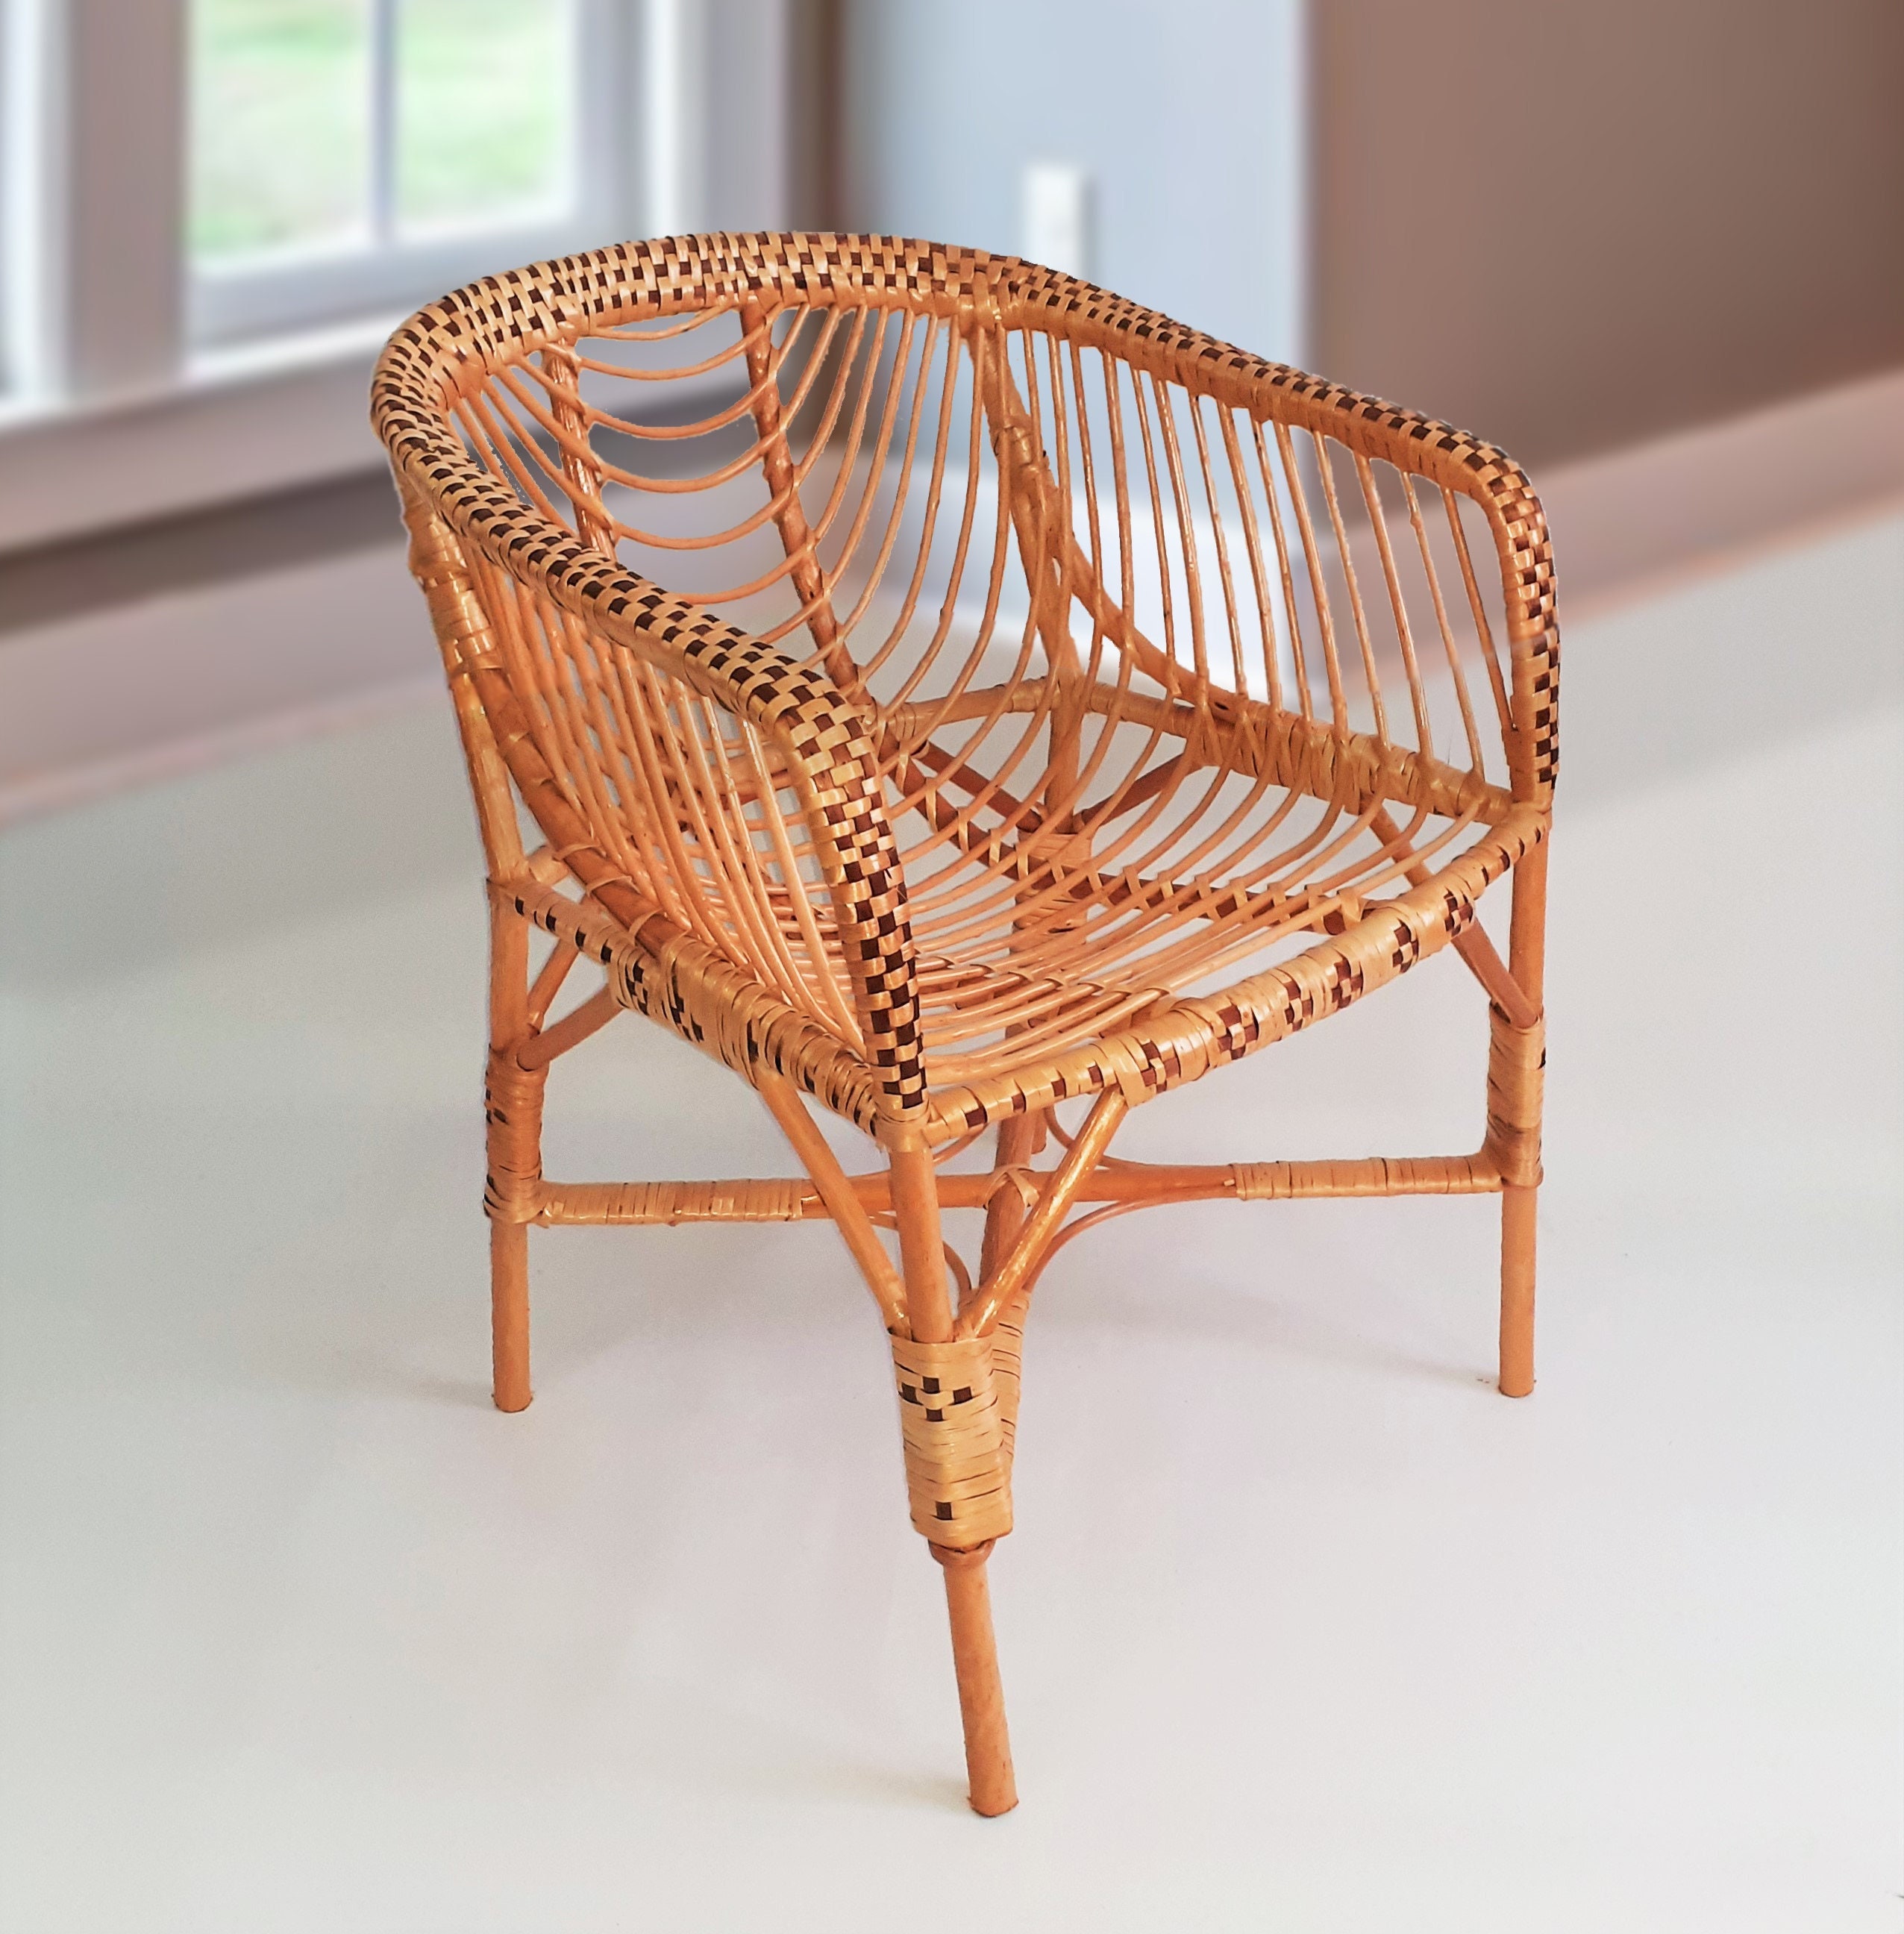 Rattan Chair Adult Wicker Chair Vintage Porch Lounge Arm Chair